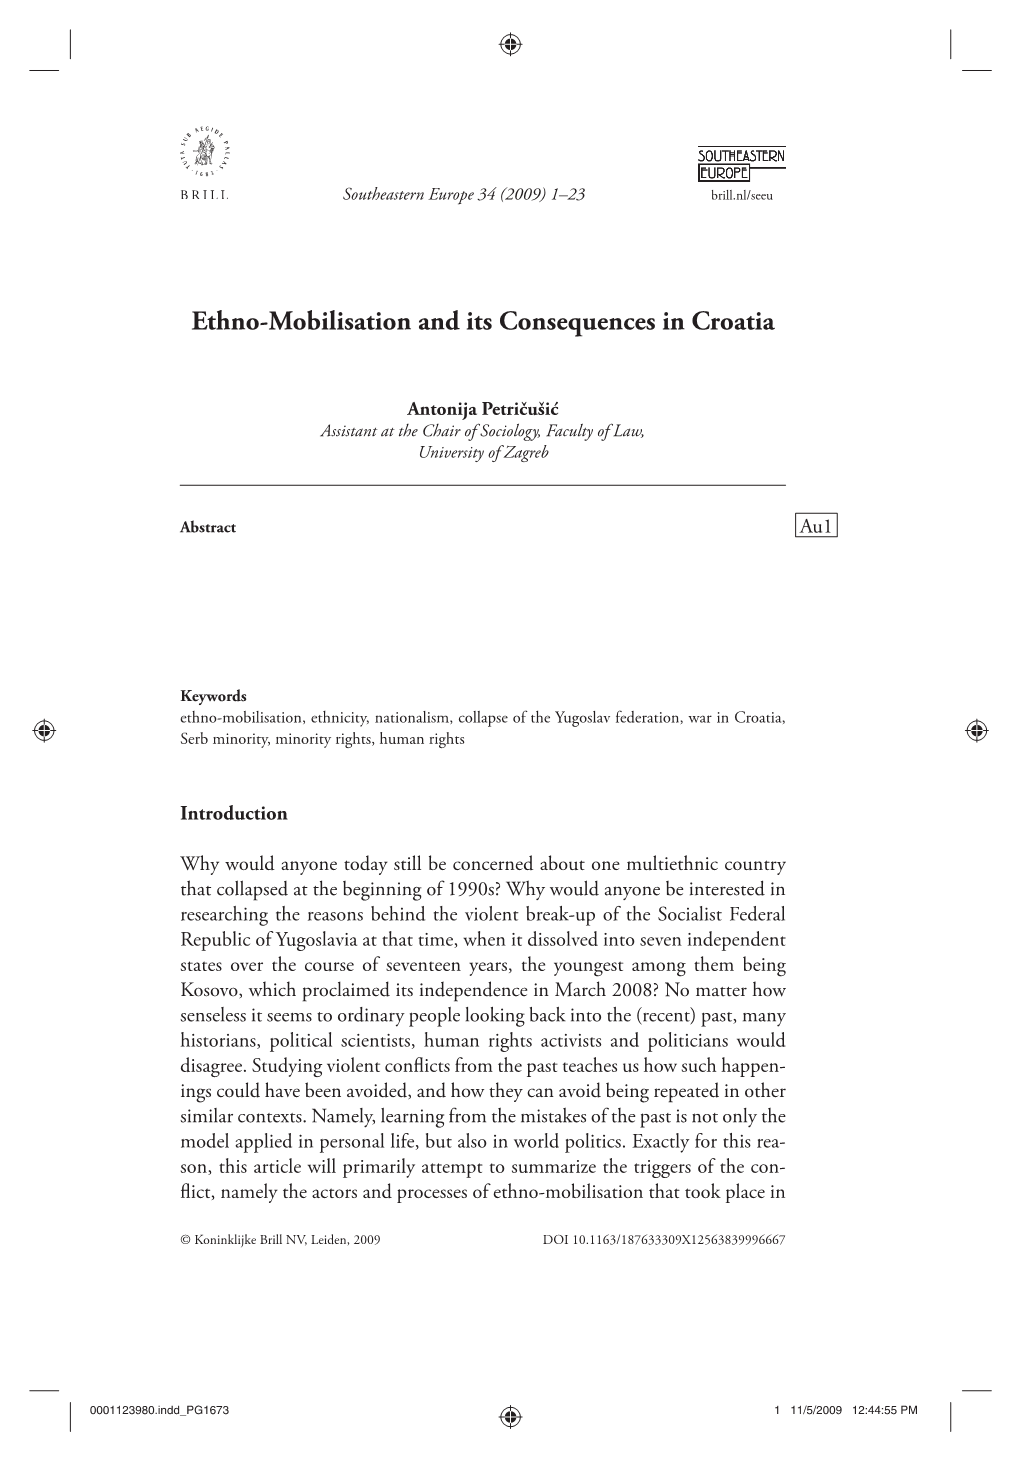 Ethno-Mobilisation and Its Consequences in Croatia